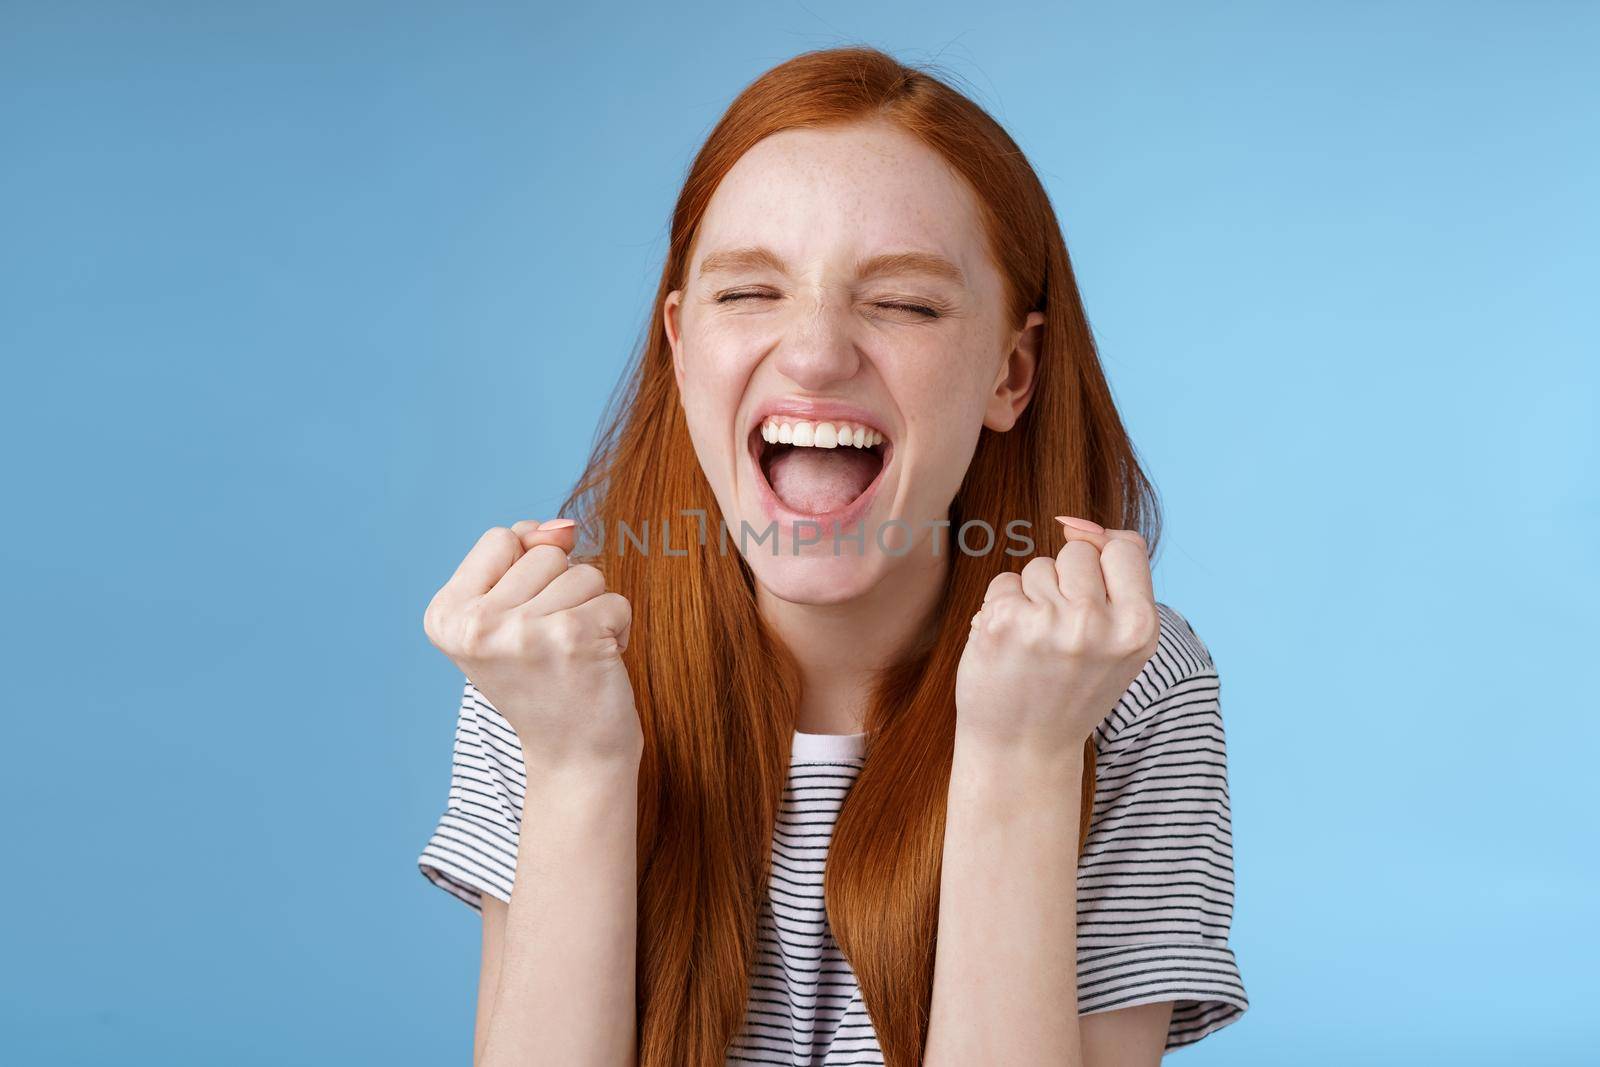 Yes achievement goal lifetime. Smiling happy european redhead girl raising clenched fists cheerful rejoicing yelling yeah accomplish goal success triumphing victory, great news win lottery.